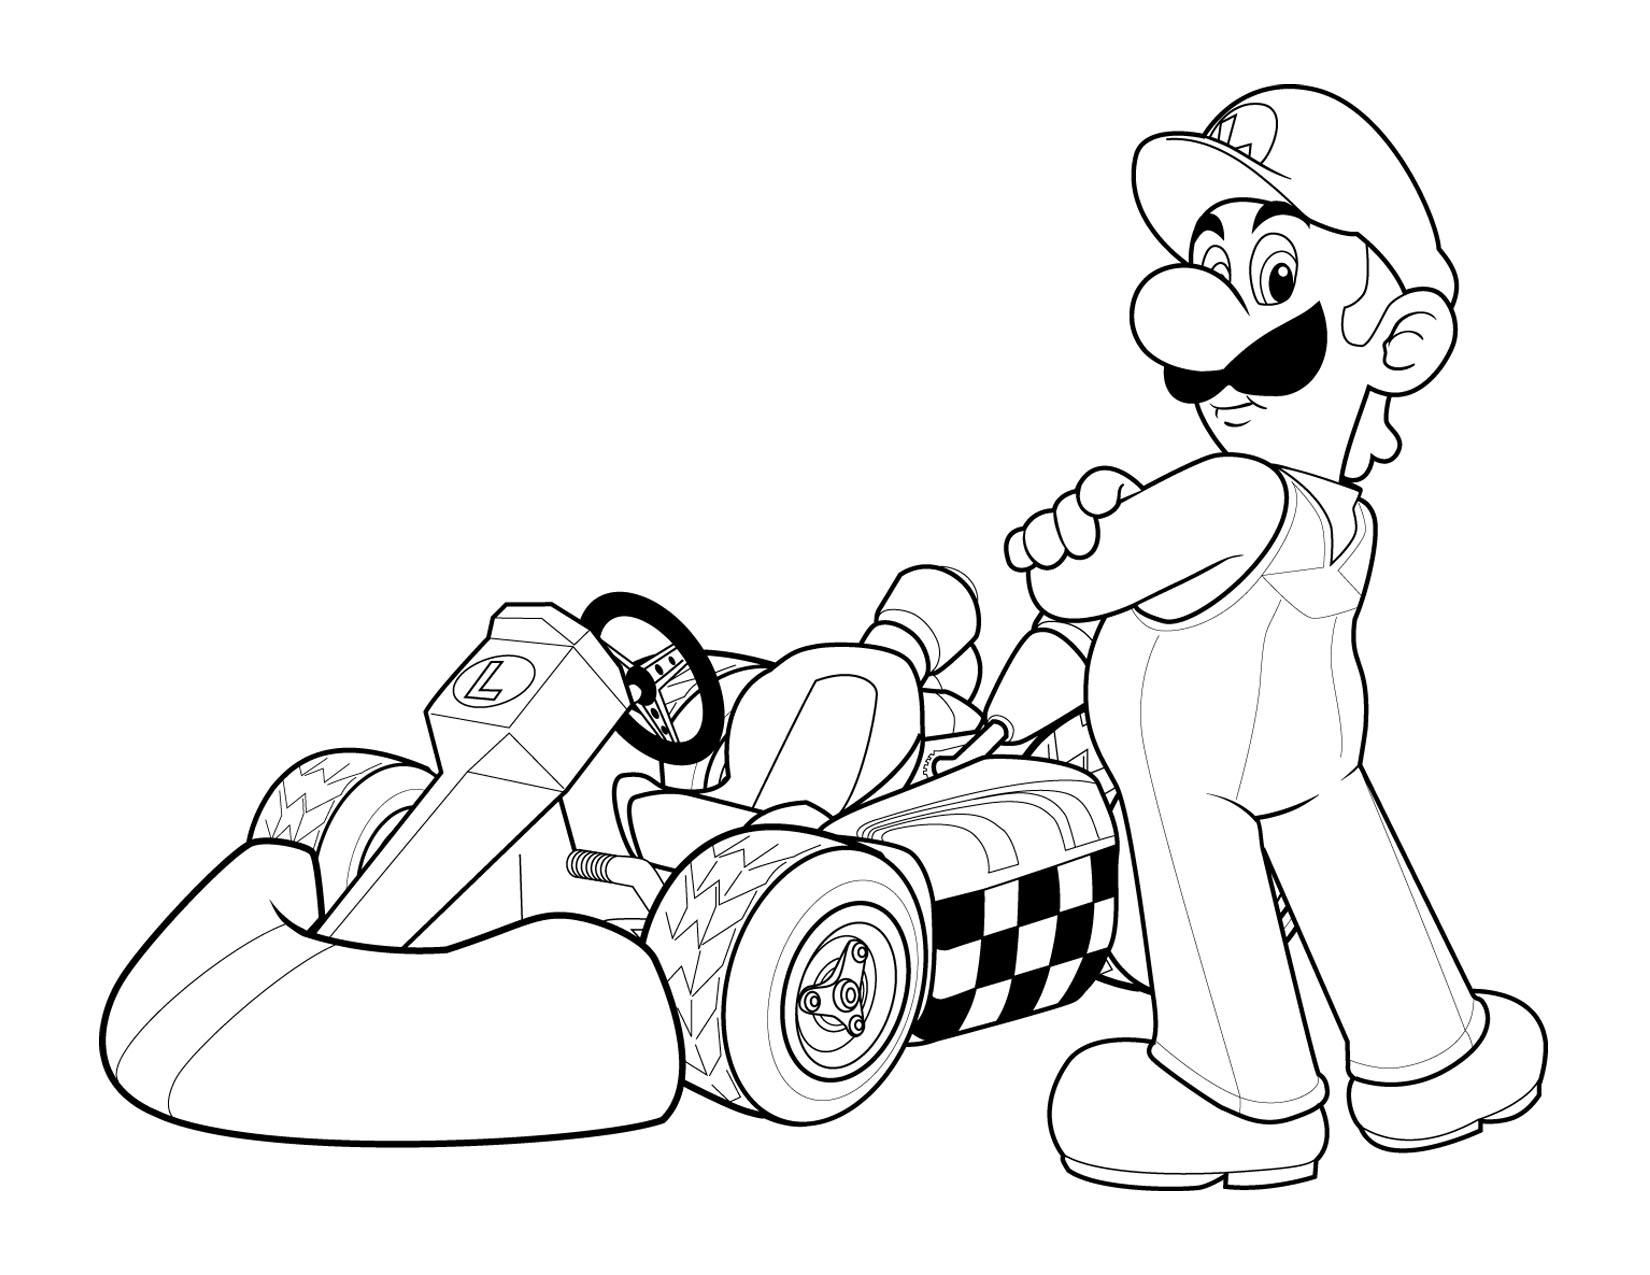 Mario Bros Coloring Pages To Print - High Quality Coloring Pages